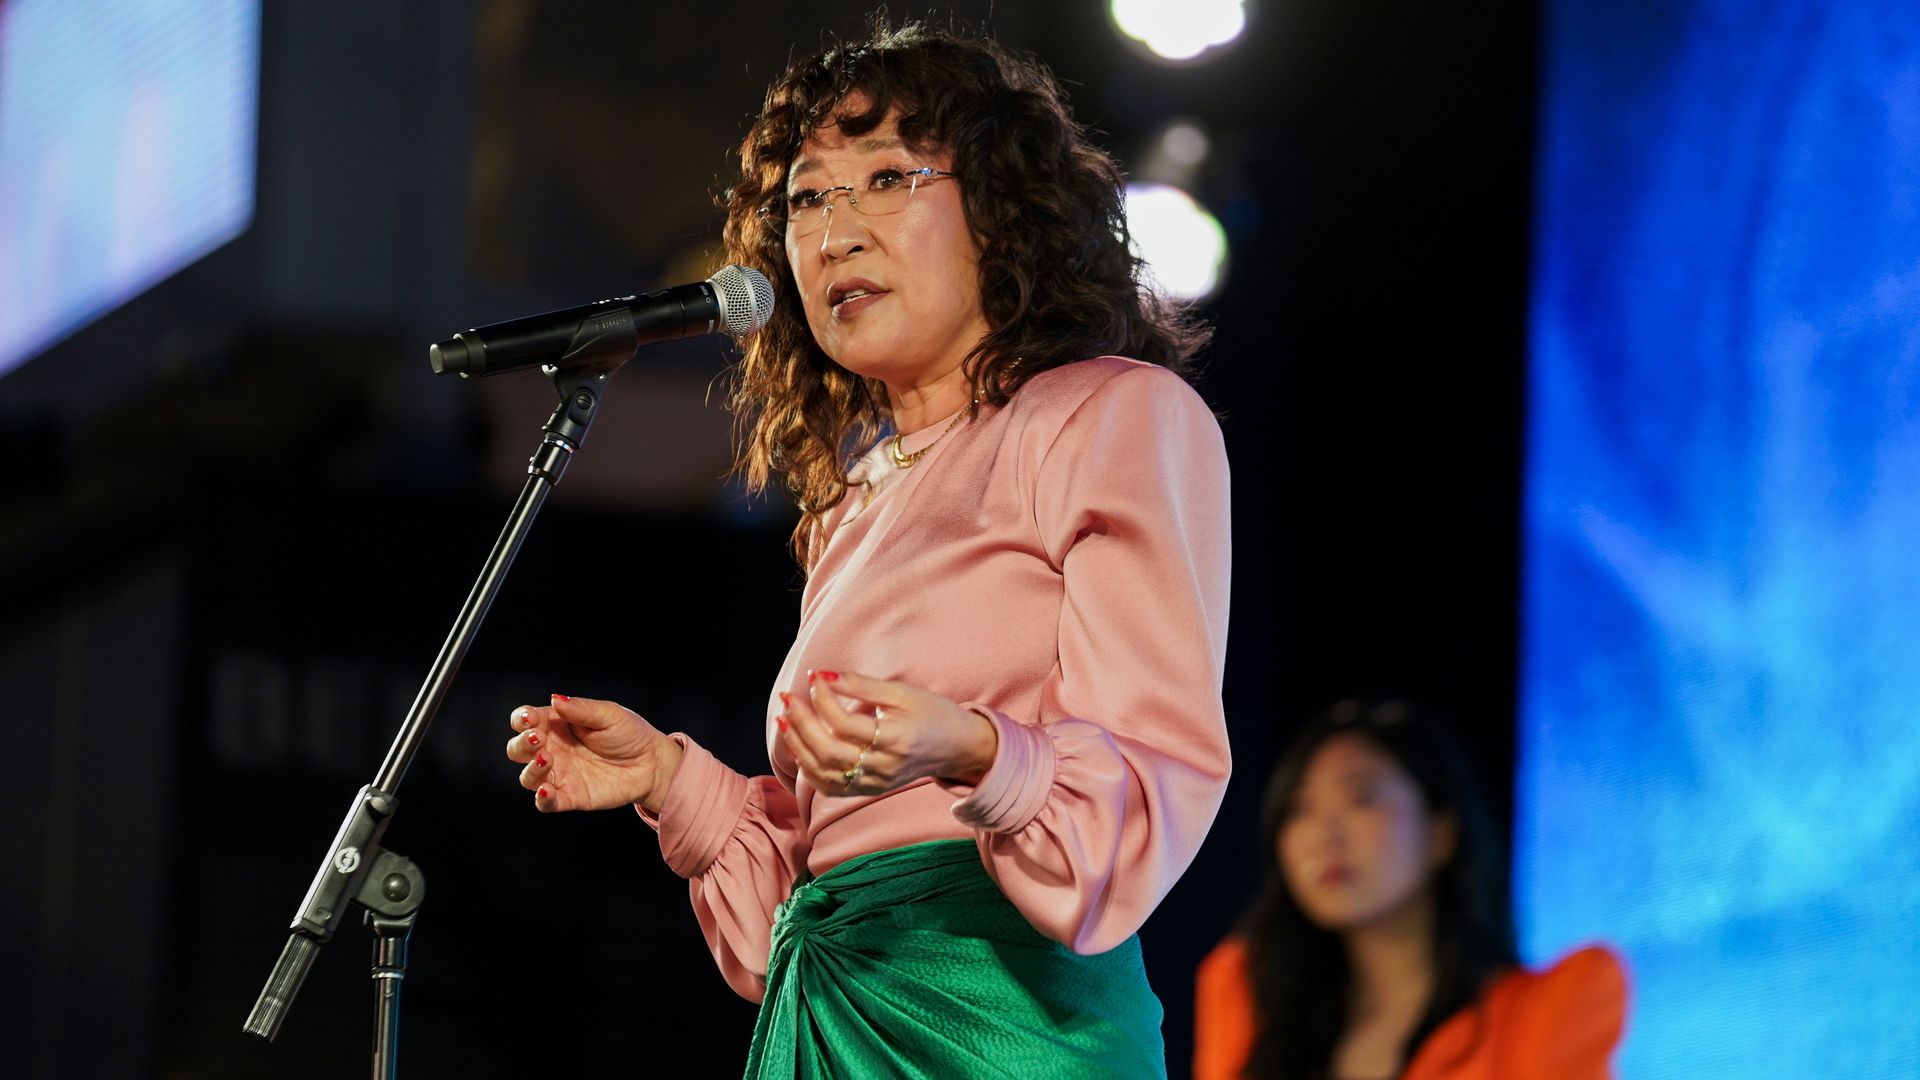 woman on stage giving a speech wearing a white top and green bottoms